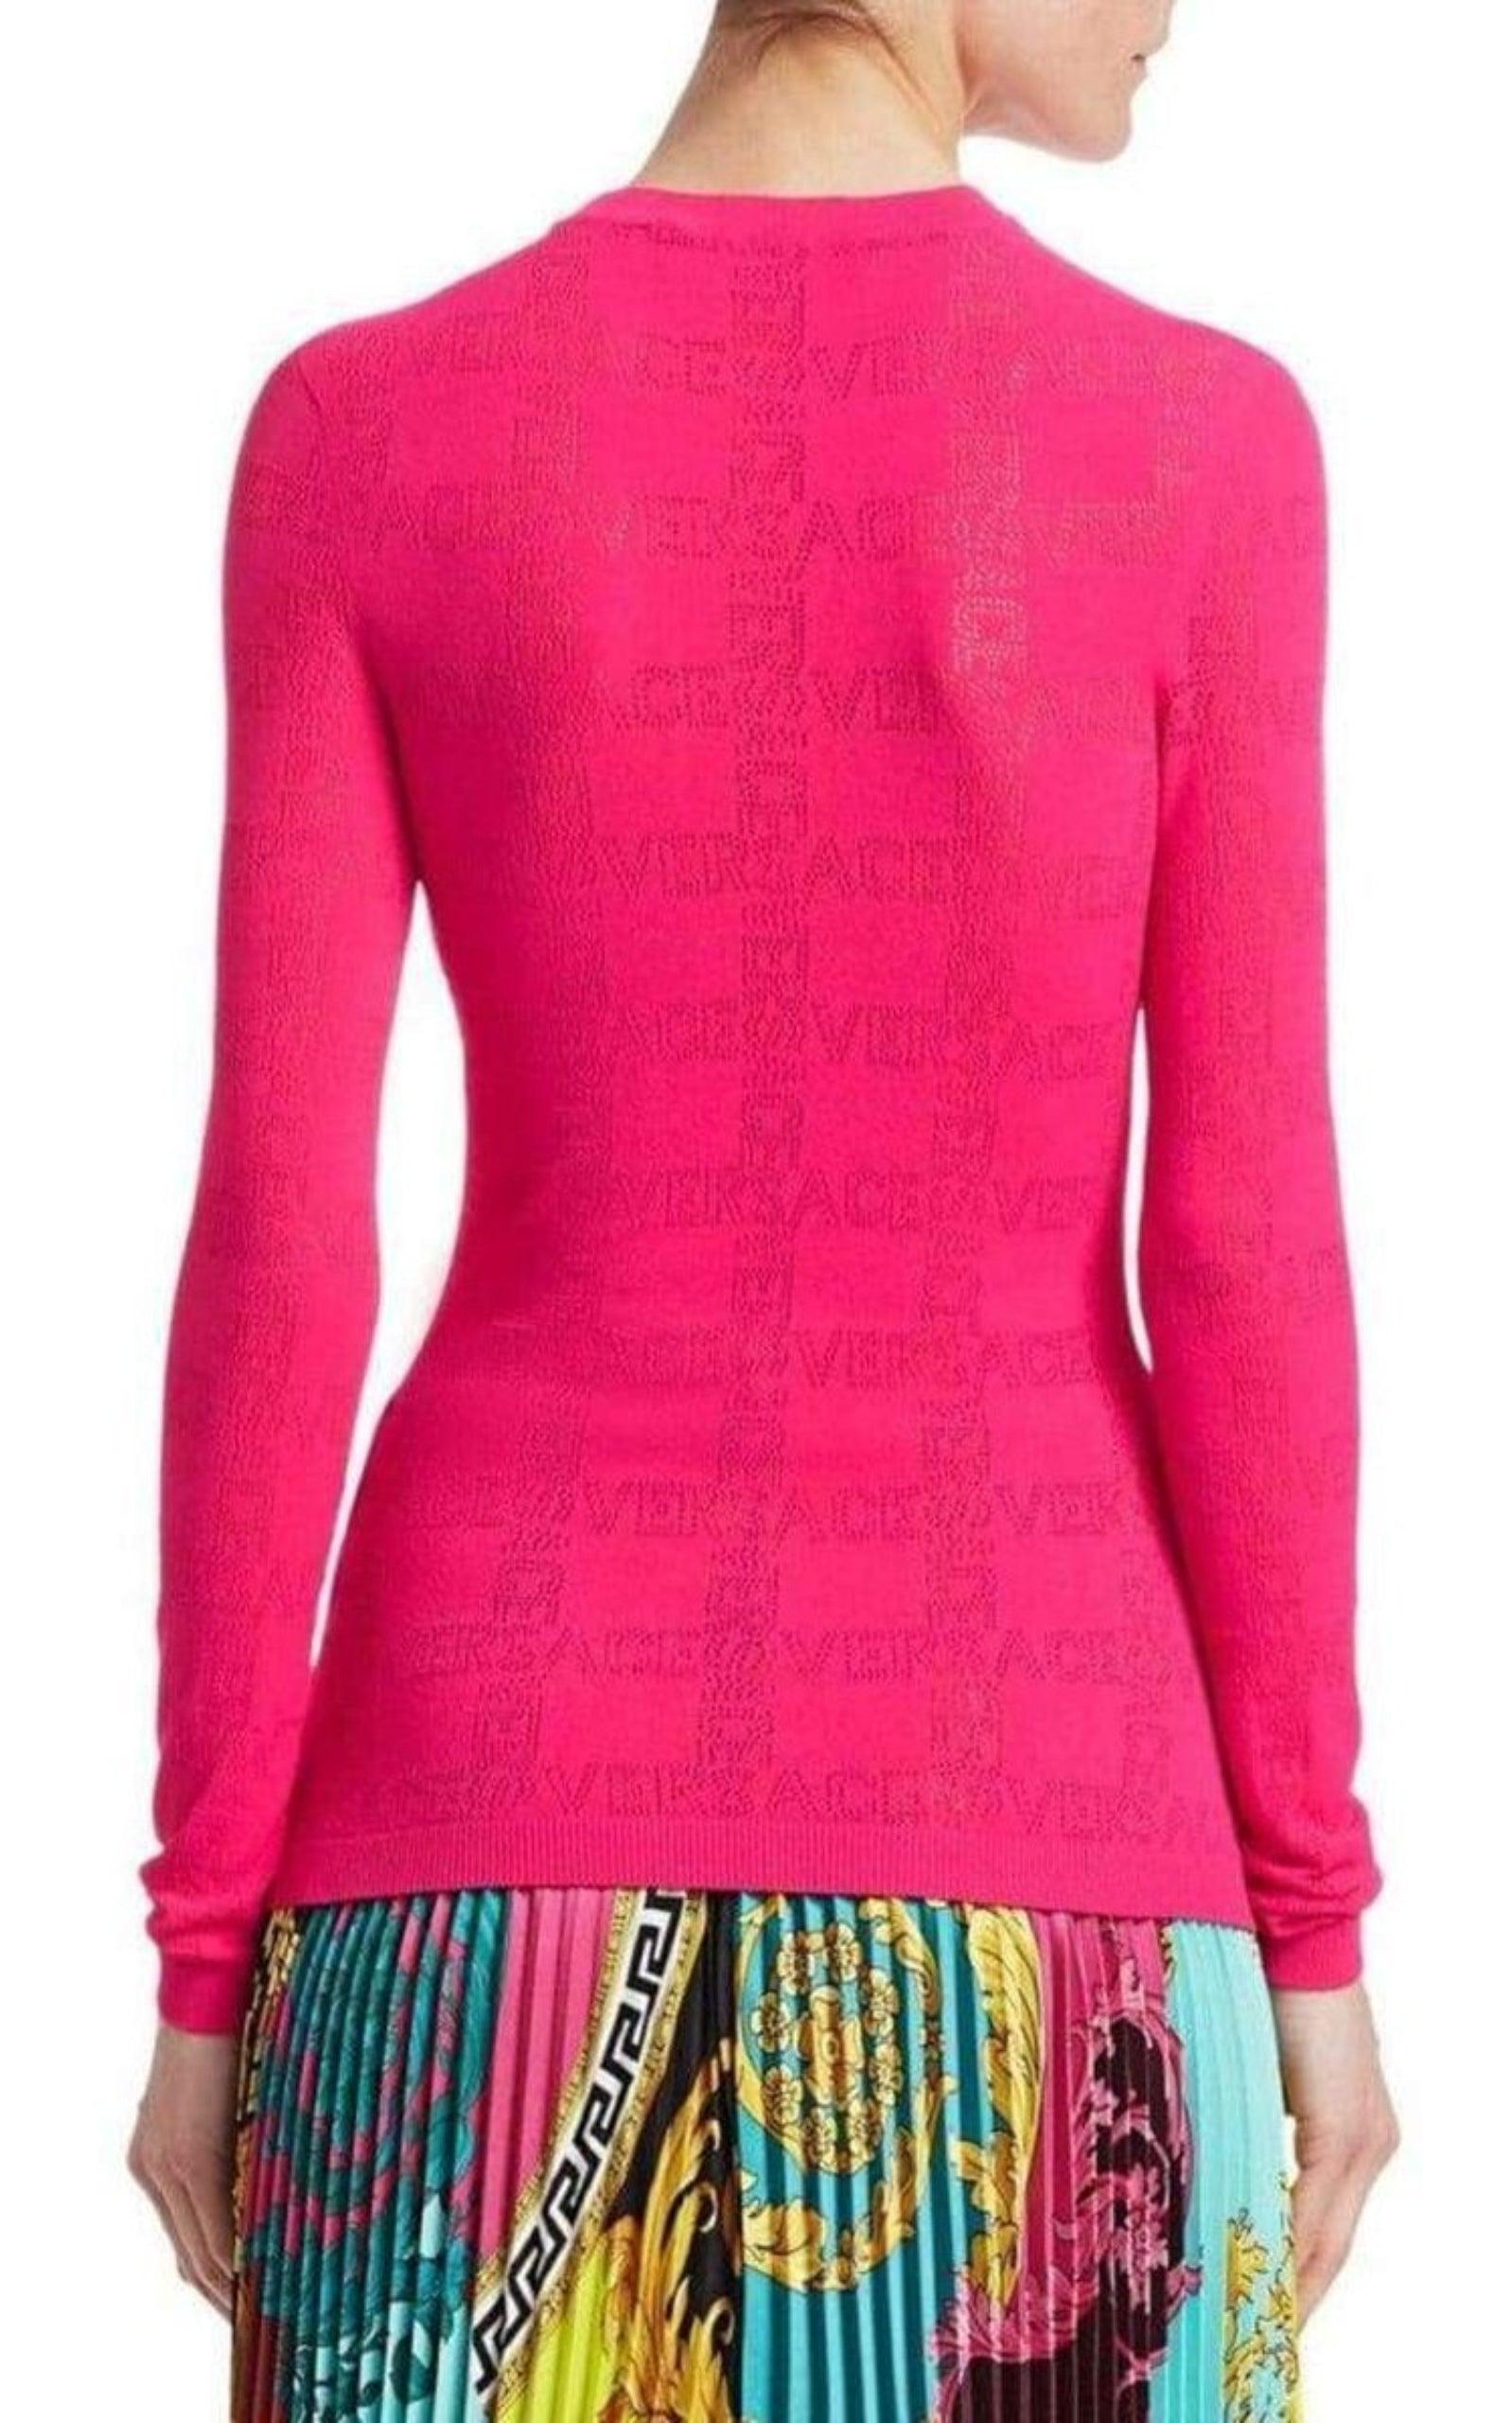  VersacePerforated Logo Stretch Knit Sweater - Runway Catalog